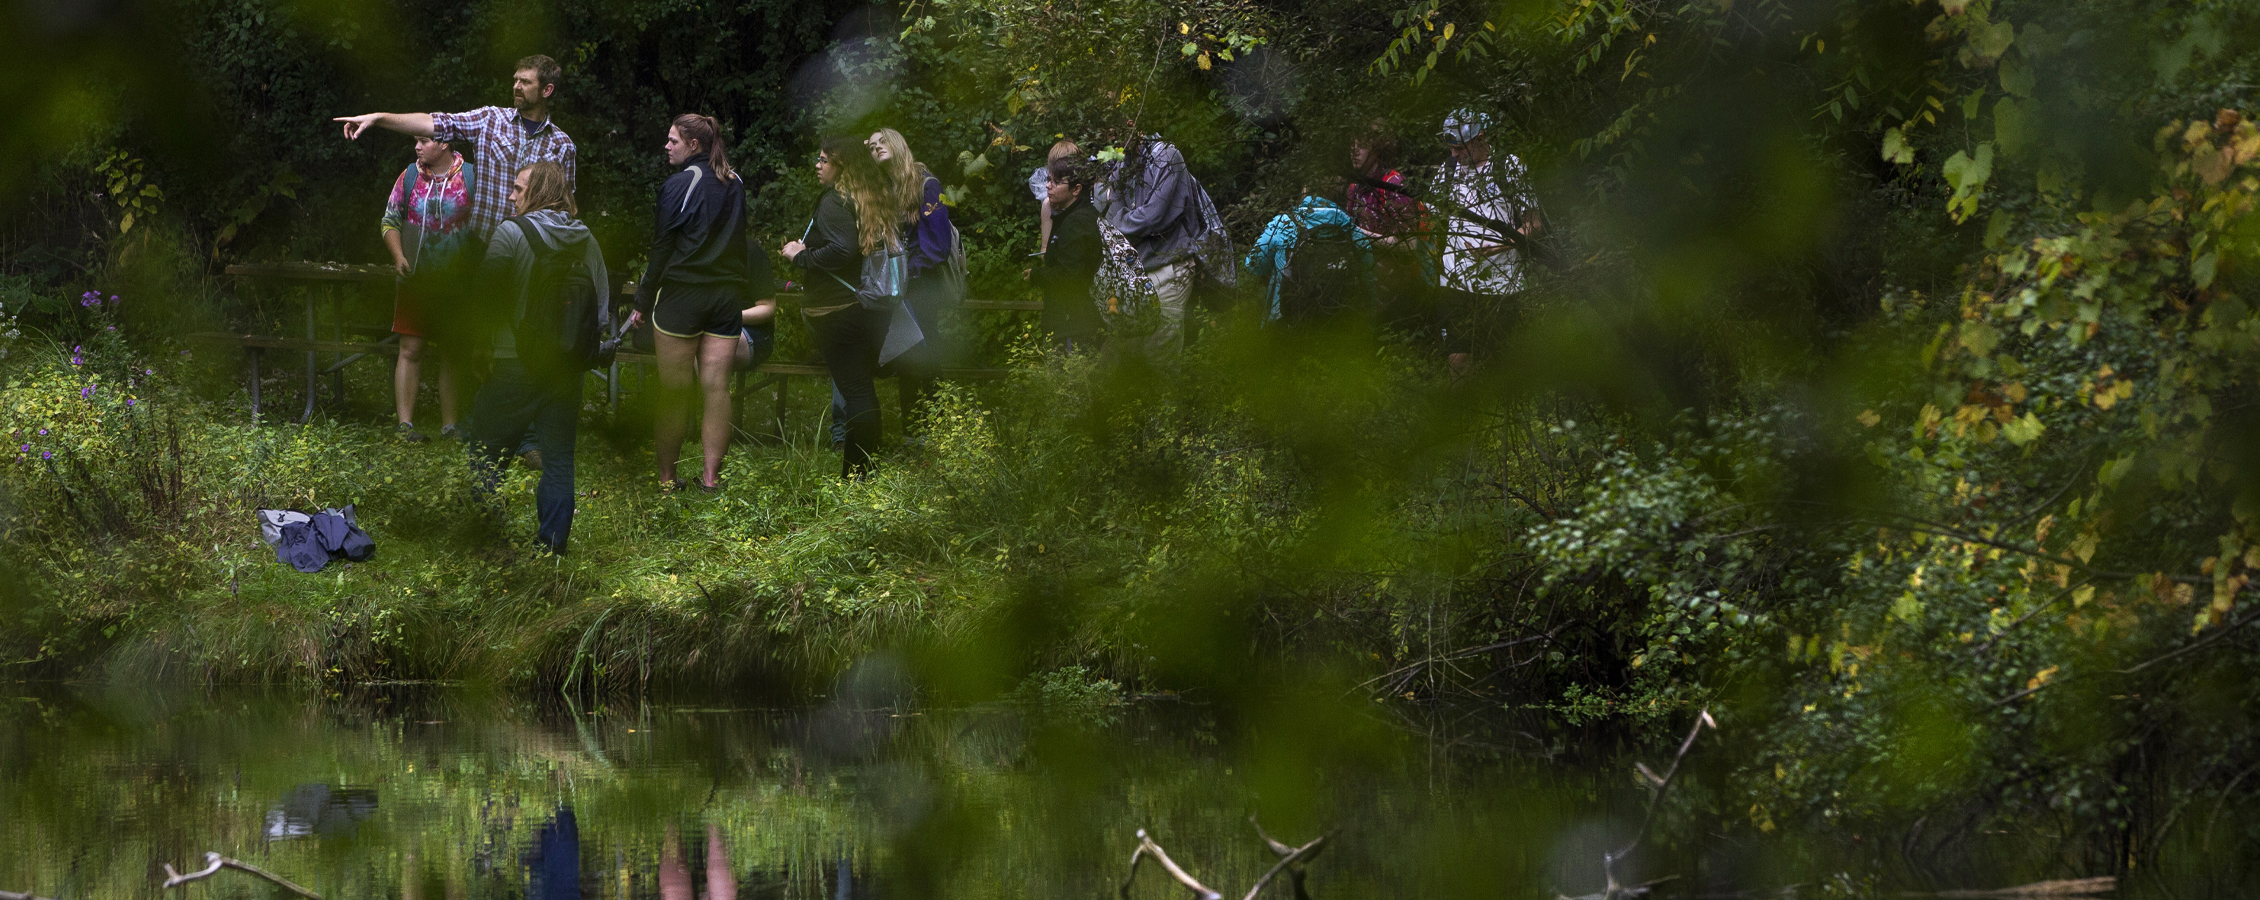 Students and a faculty member walk through a forest with a small body of water.